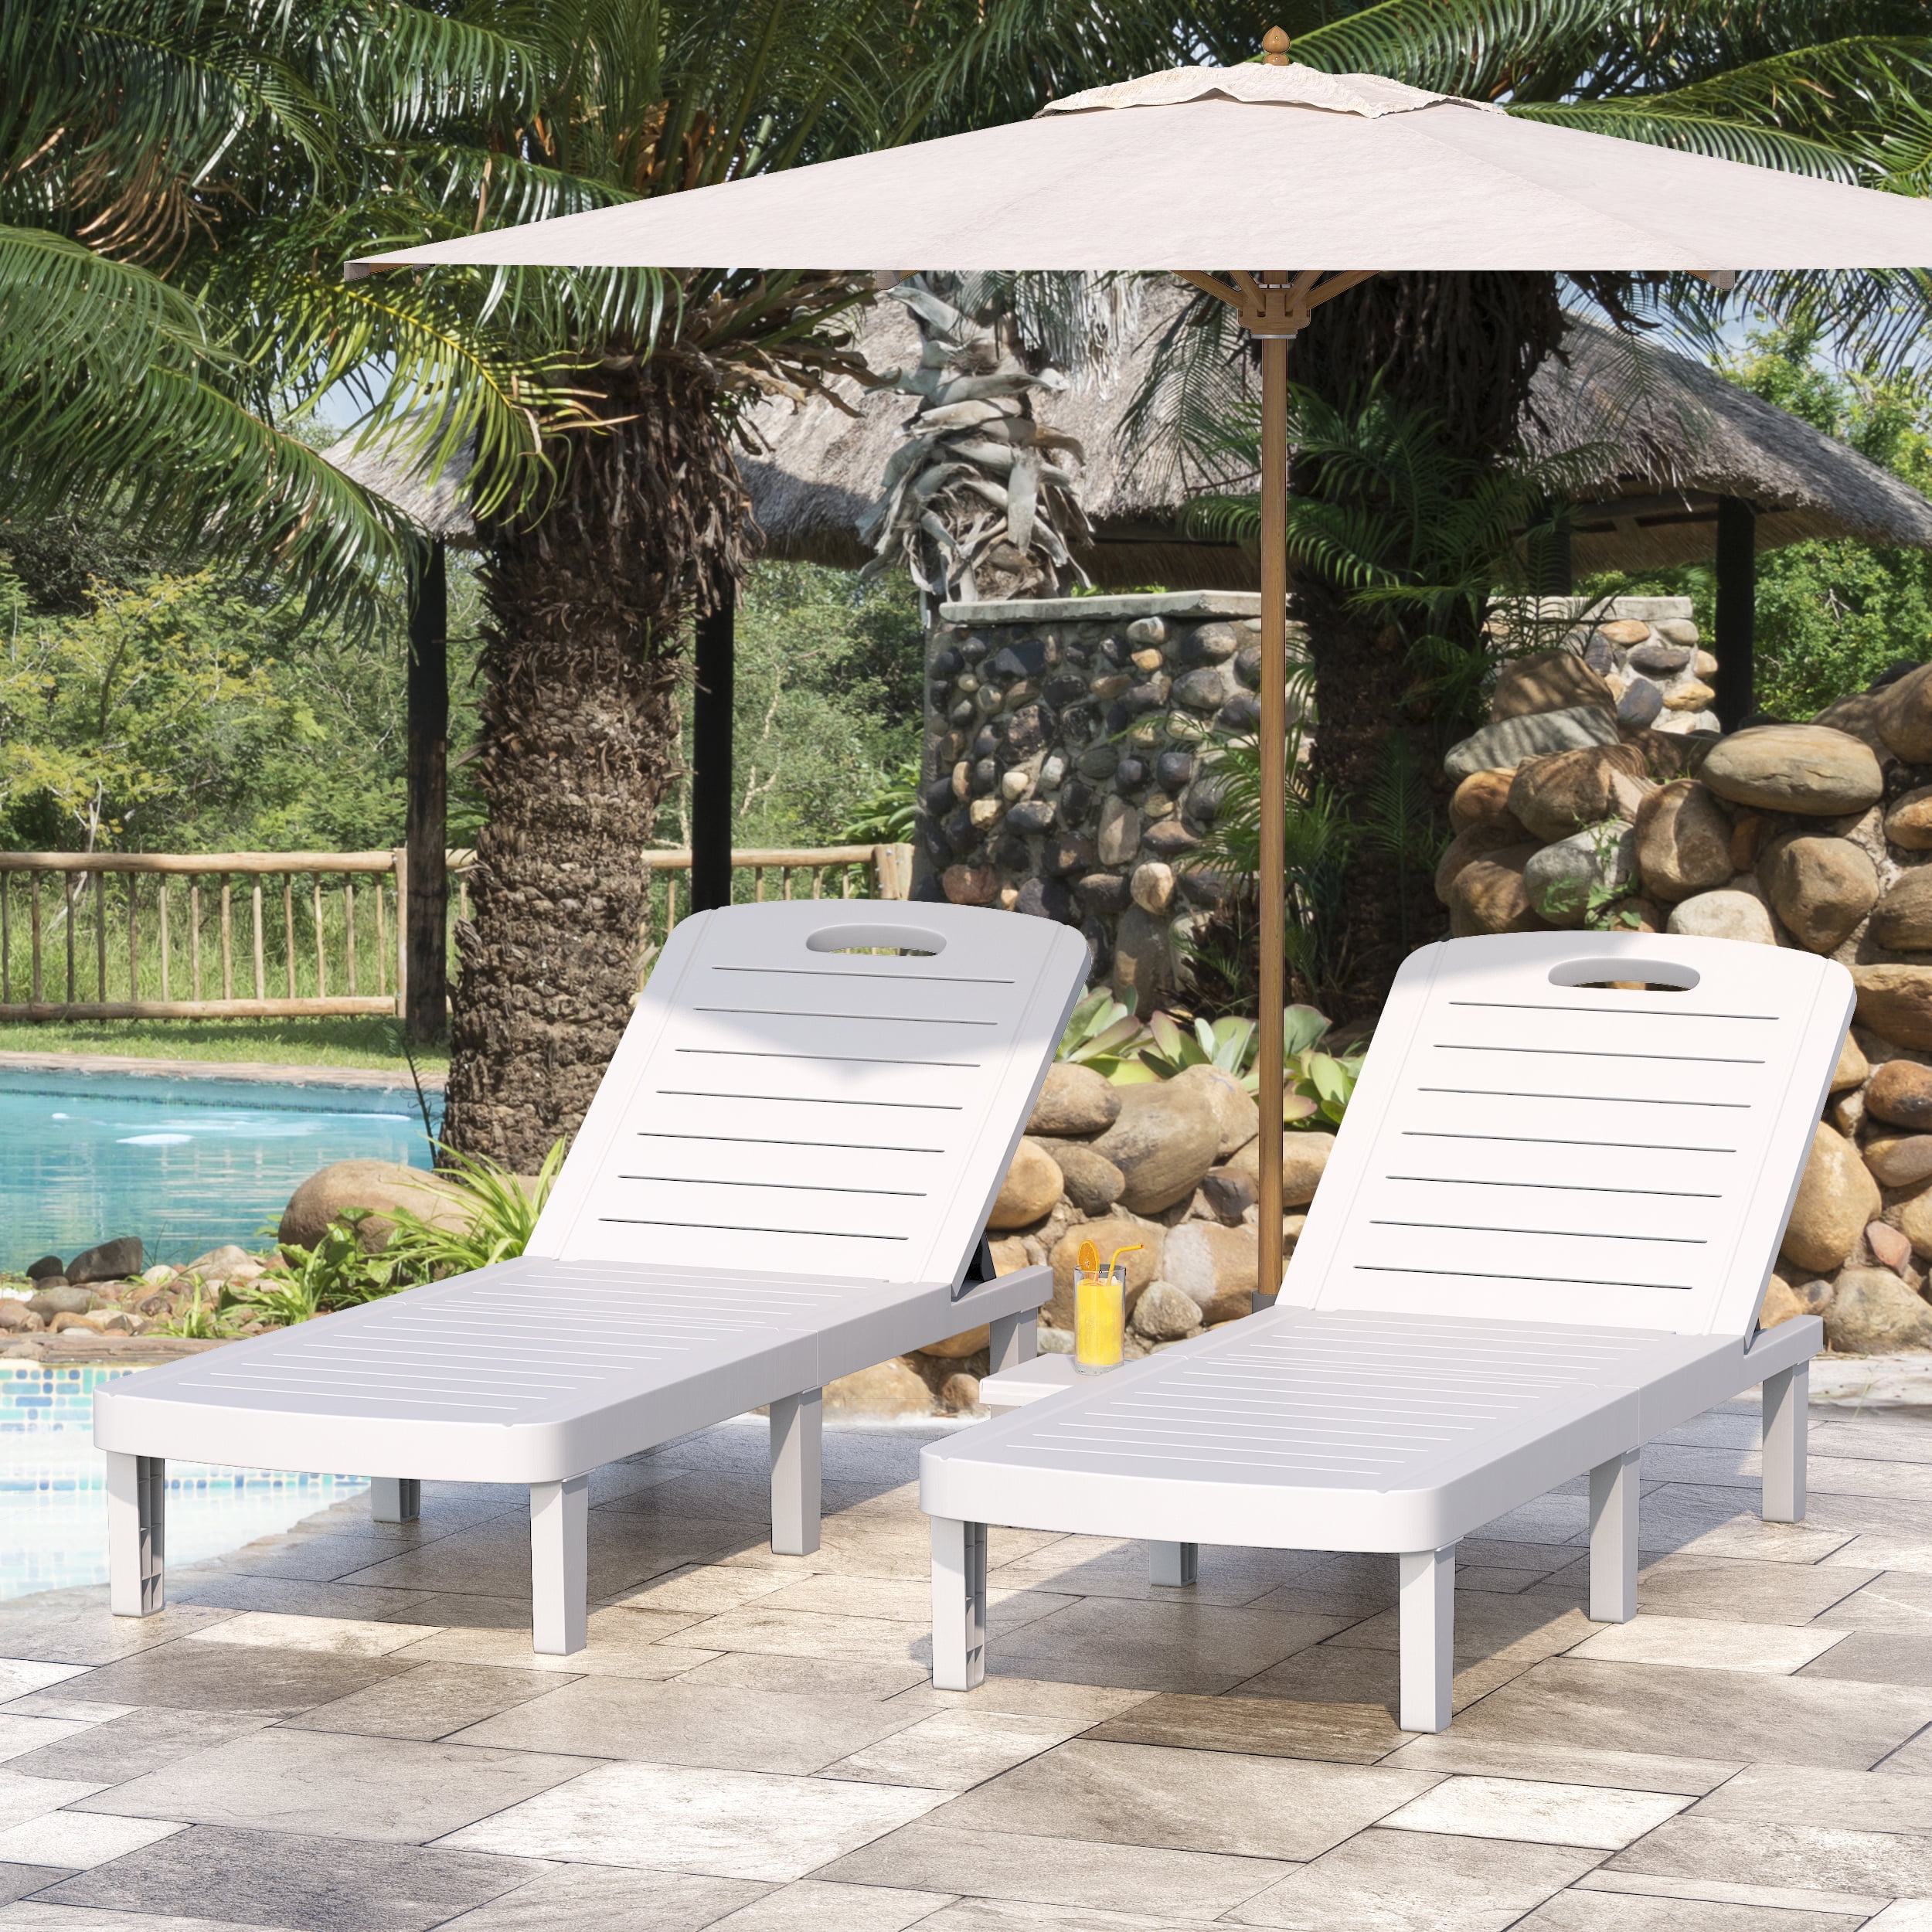 Set of 2 Patio Chaise Lounge, Outdoor Pool Lounge Chair for 2, Layout Chair  Outdoor Furniture Adjustable with 5 Positions | Side Table | Max Weight